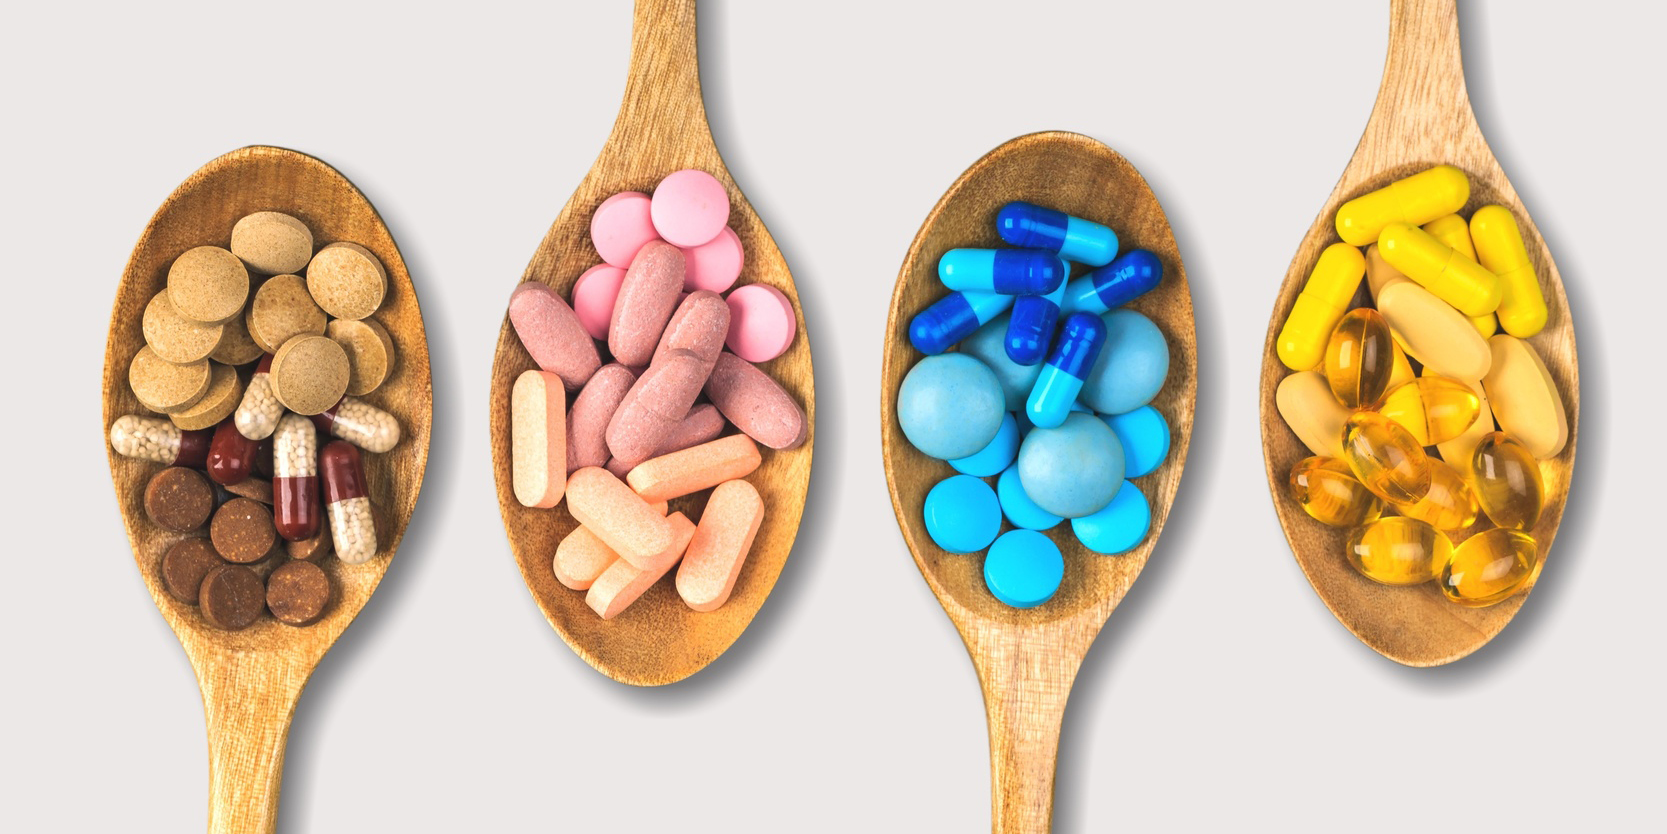 Will Supplements Be Regulated Along with Drugs?